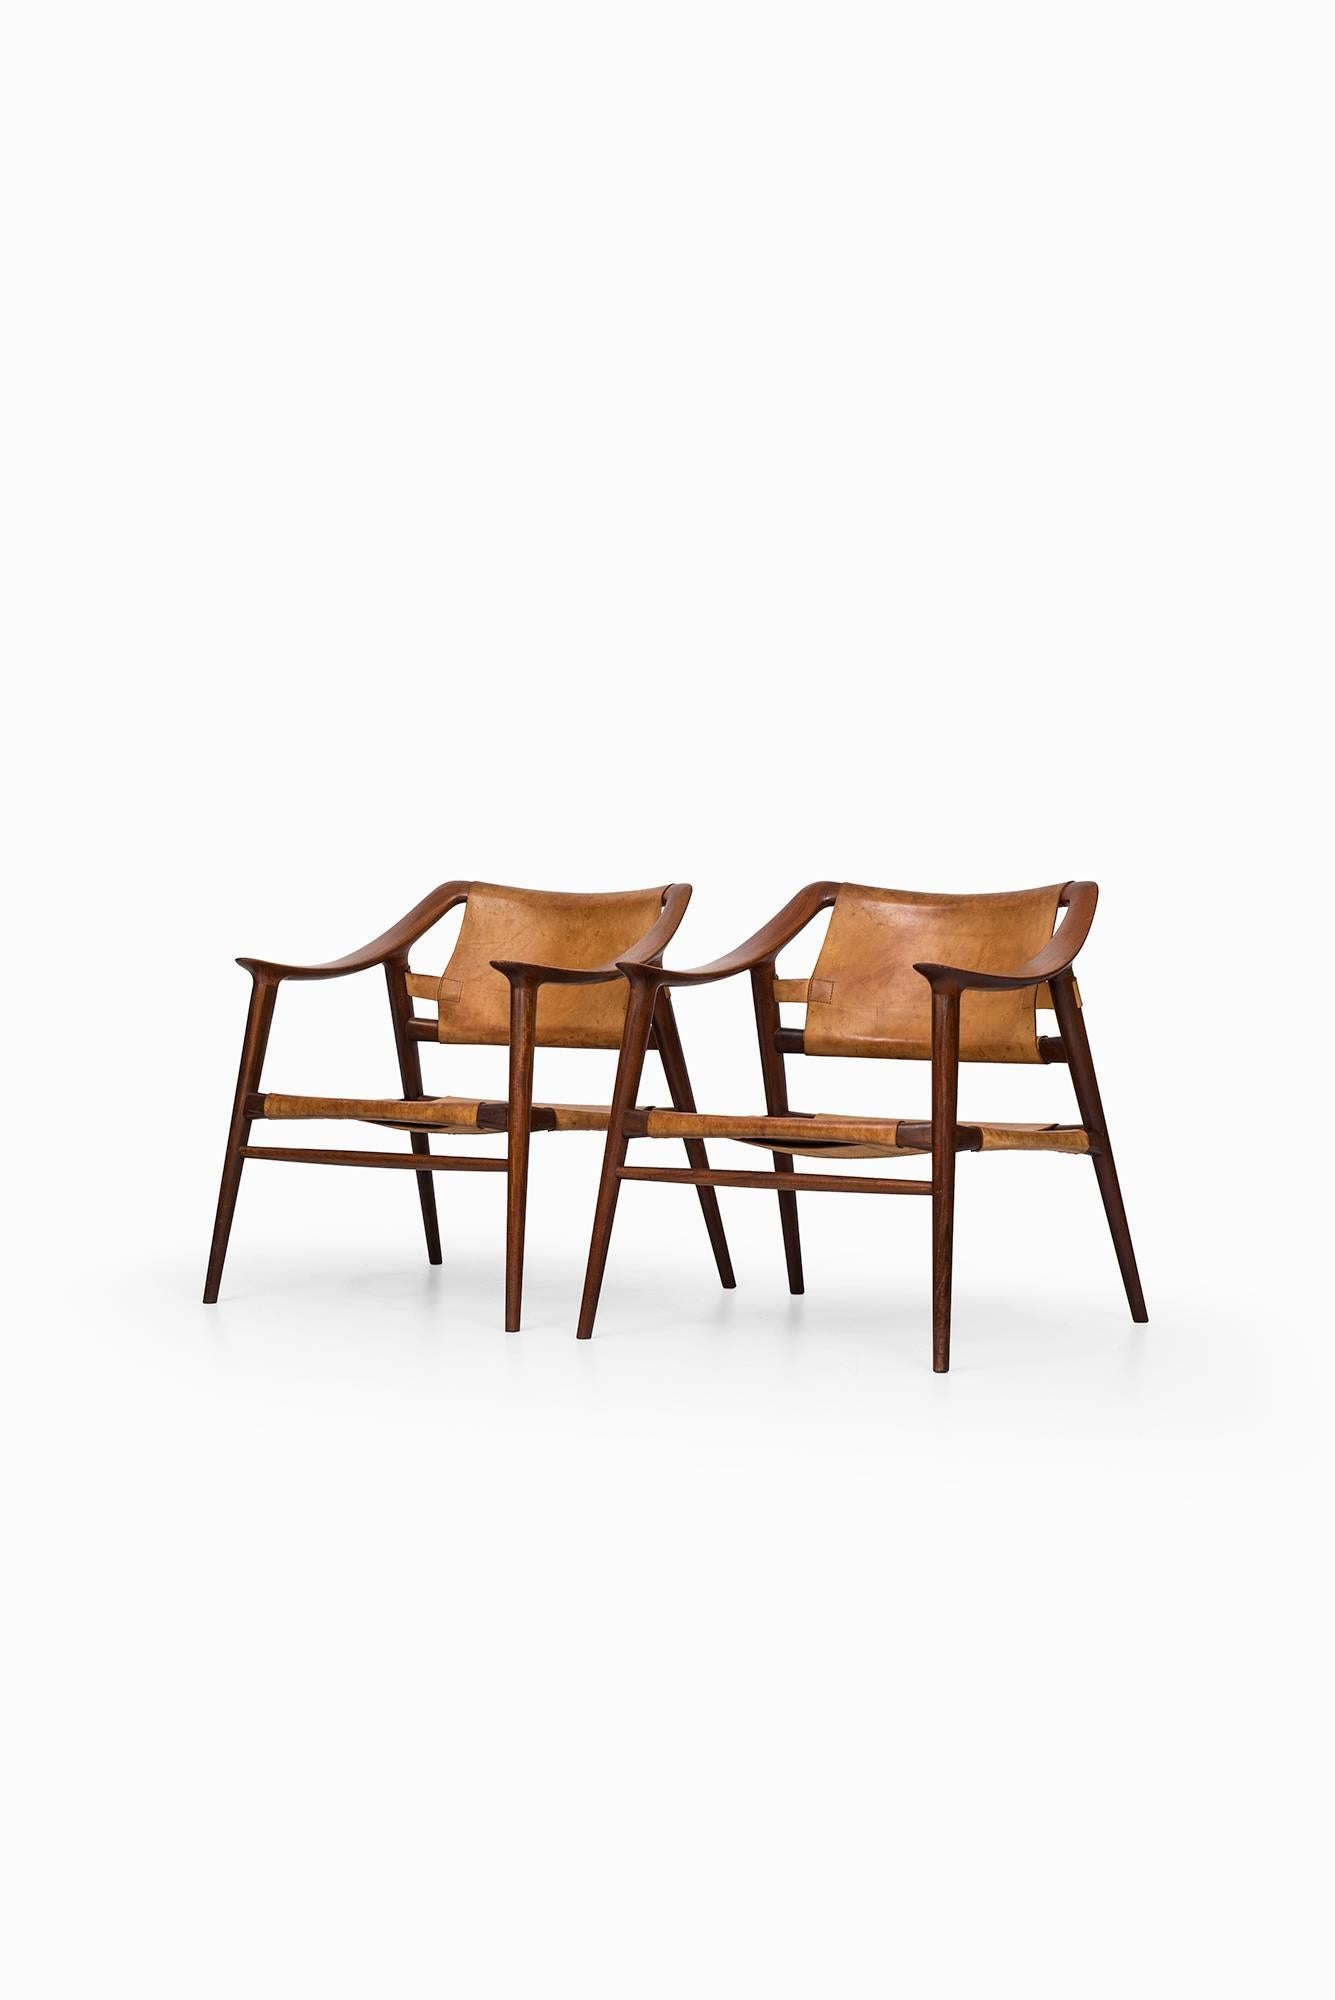 Very rare pair of easy chairs model 56/2 ‘Bambi’ designed by Rolf Rastad & Adolf Relling. Produced by Gustav Bahus in Norway.